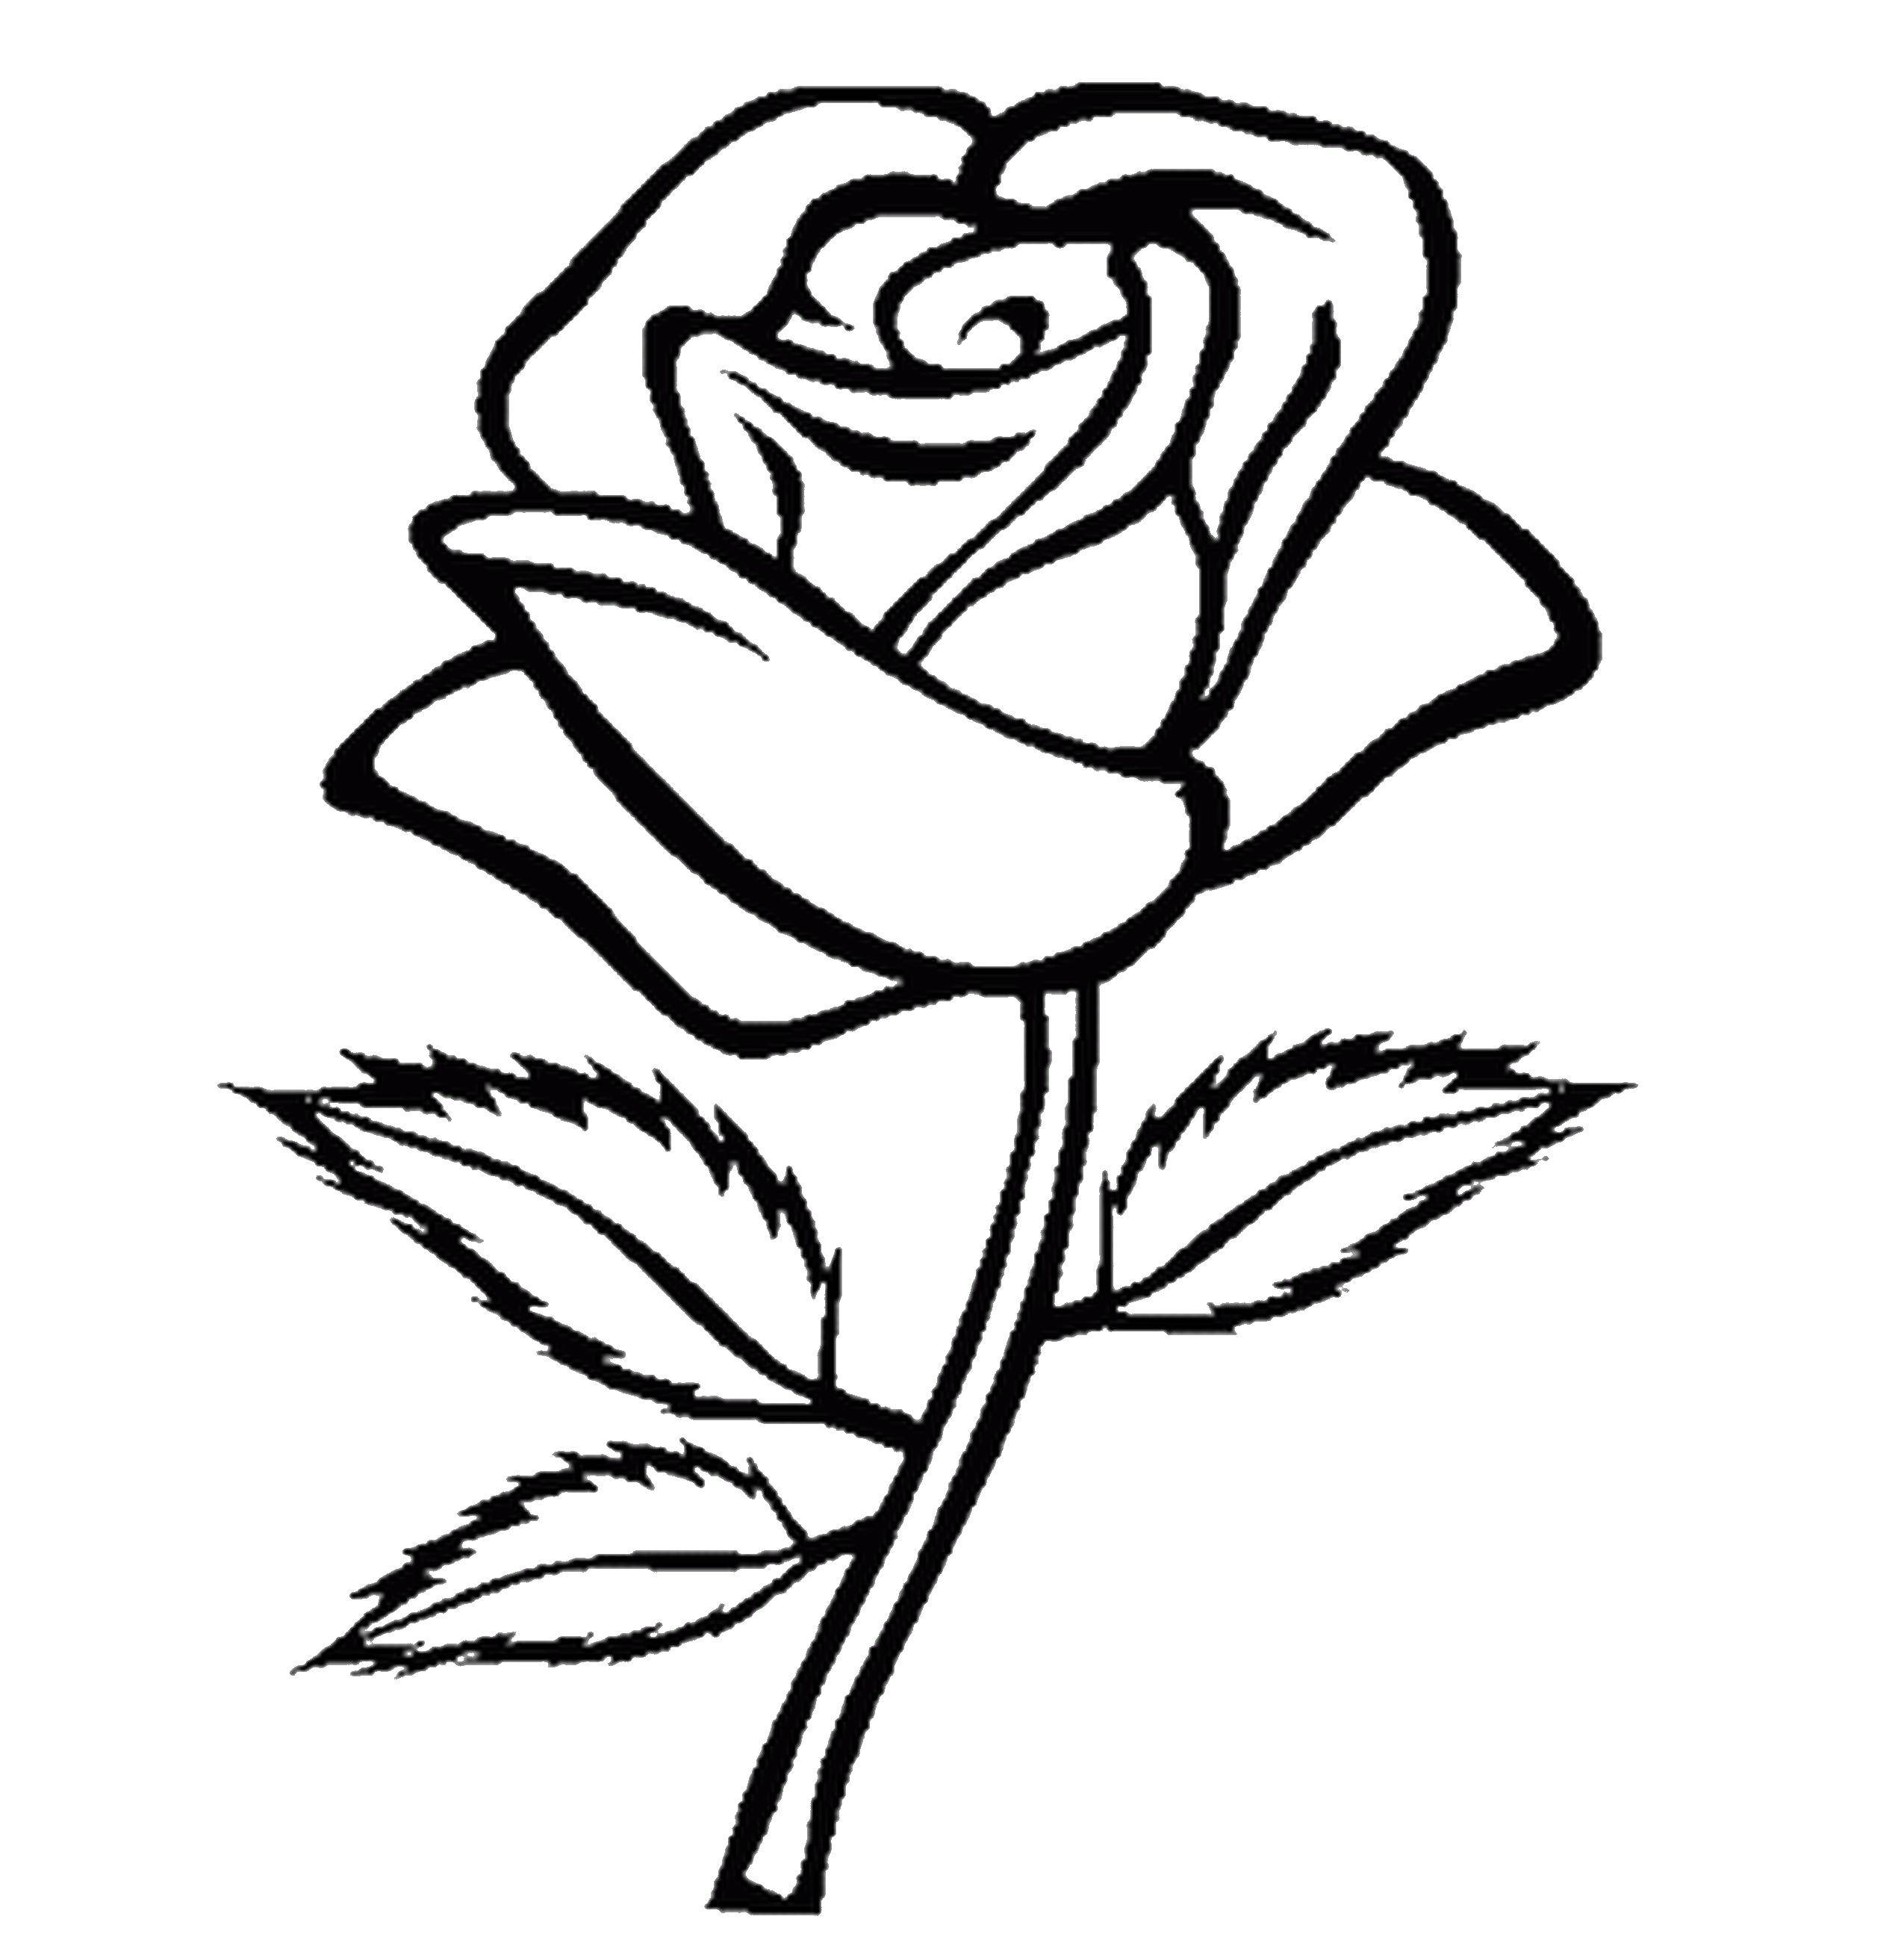 Coloring Rose. Category flowers. Tags:  roses, flowers.